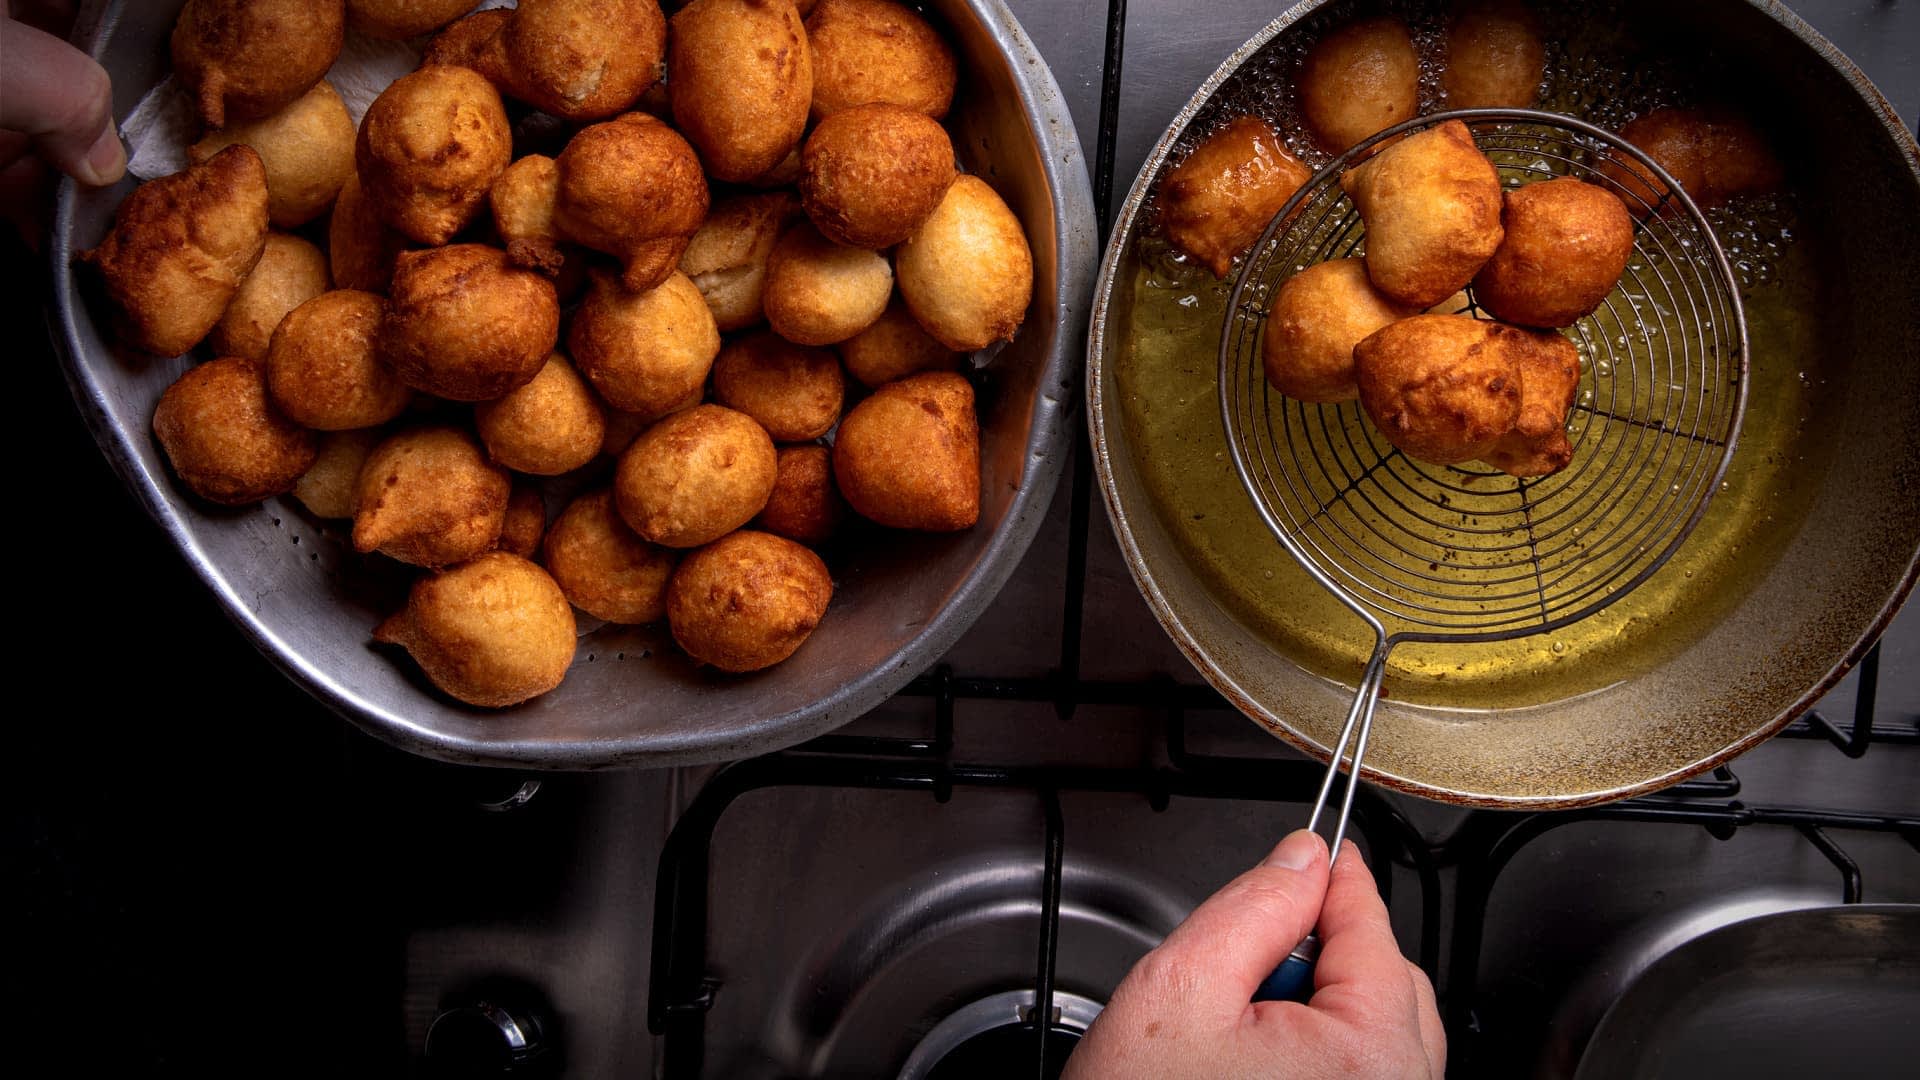  Deep frying with olive oil is healthier than frying with other oils, and it can be reused several times, with some caution, to reduce waste and enhan